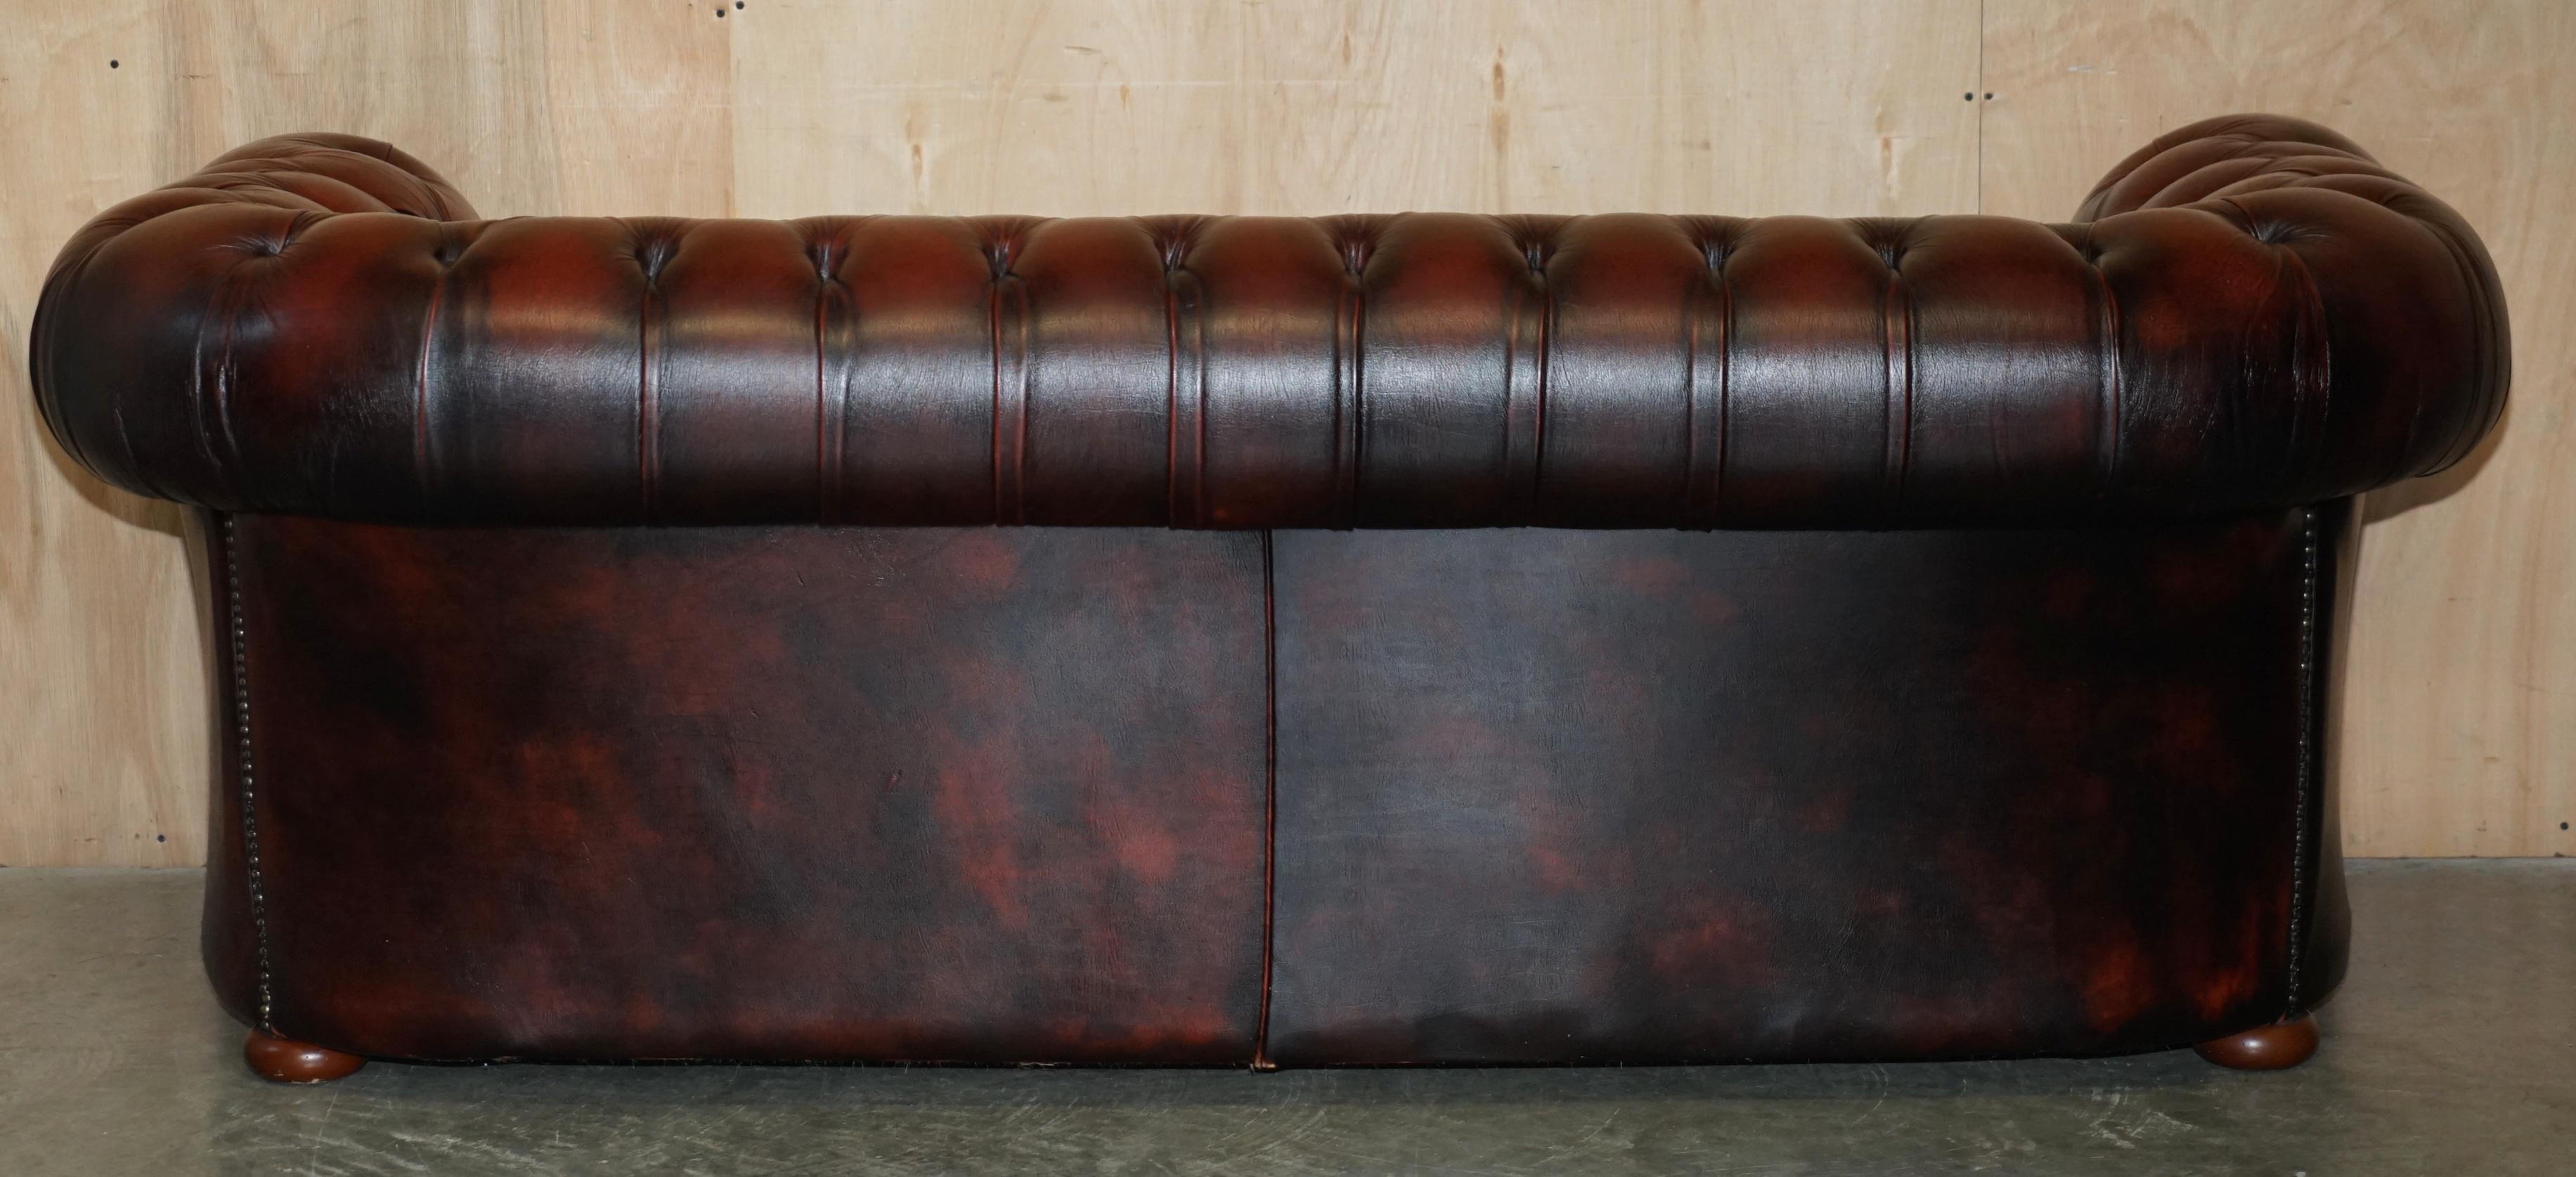 STUNNING FULLY RESTORED ENGLISH ViNTAGE BORDEAUX LEATHER CHESTERFIELD CLUB SOFA For Sale 9